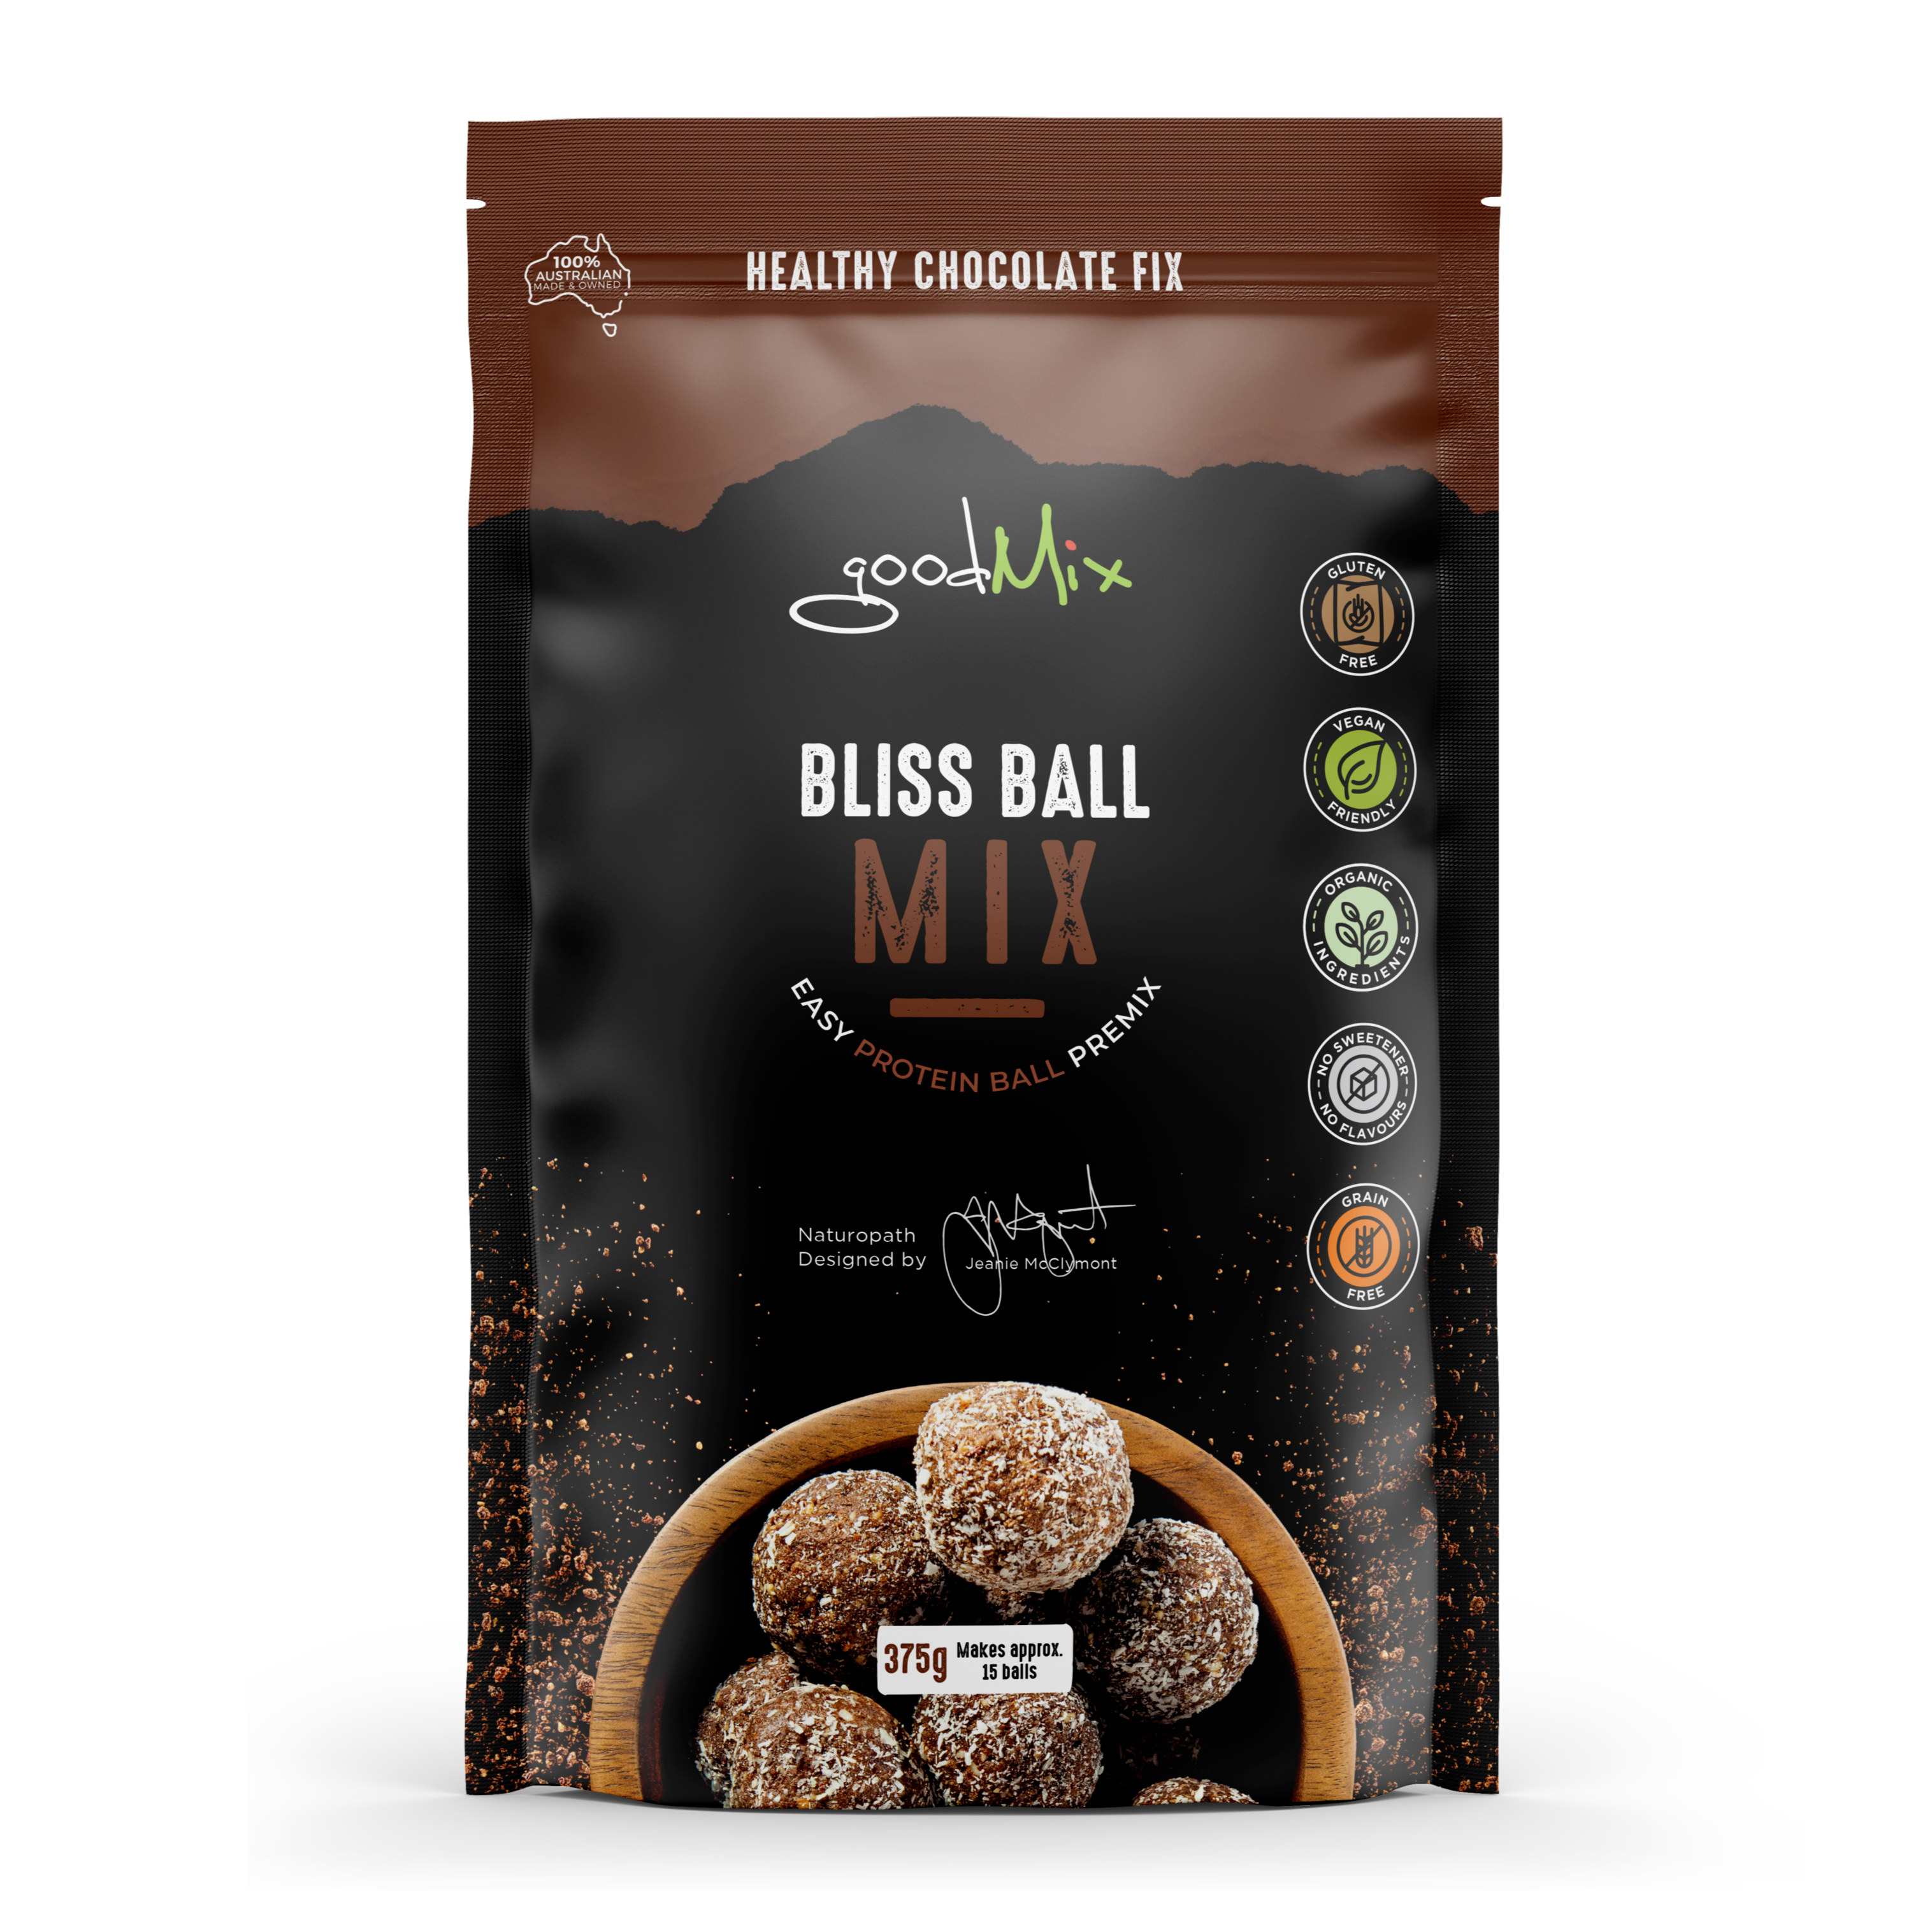 bliss ball mix an easy protein ball premix by goodMix